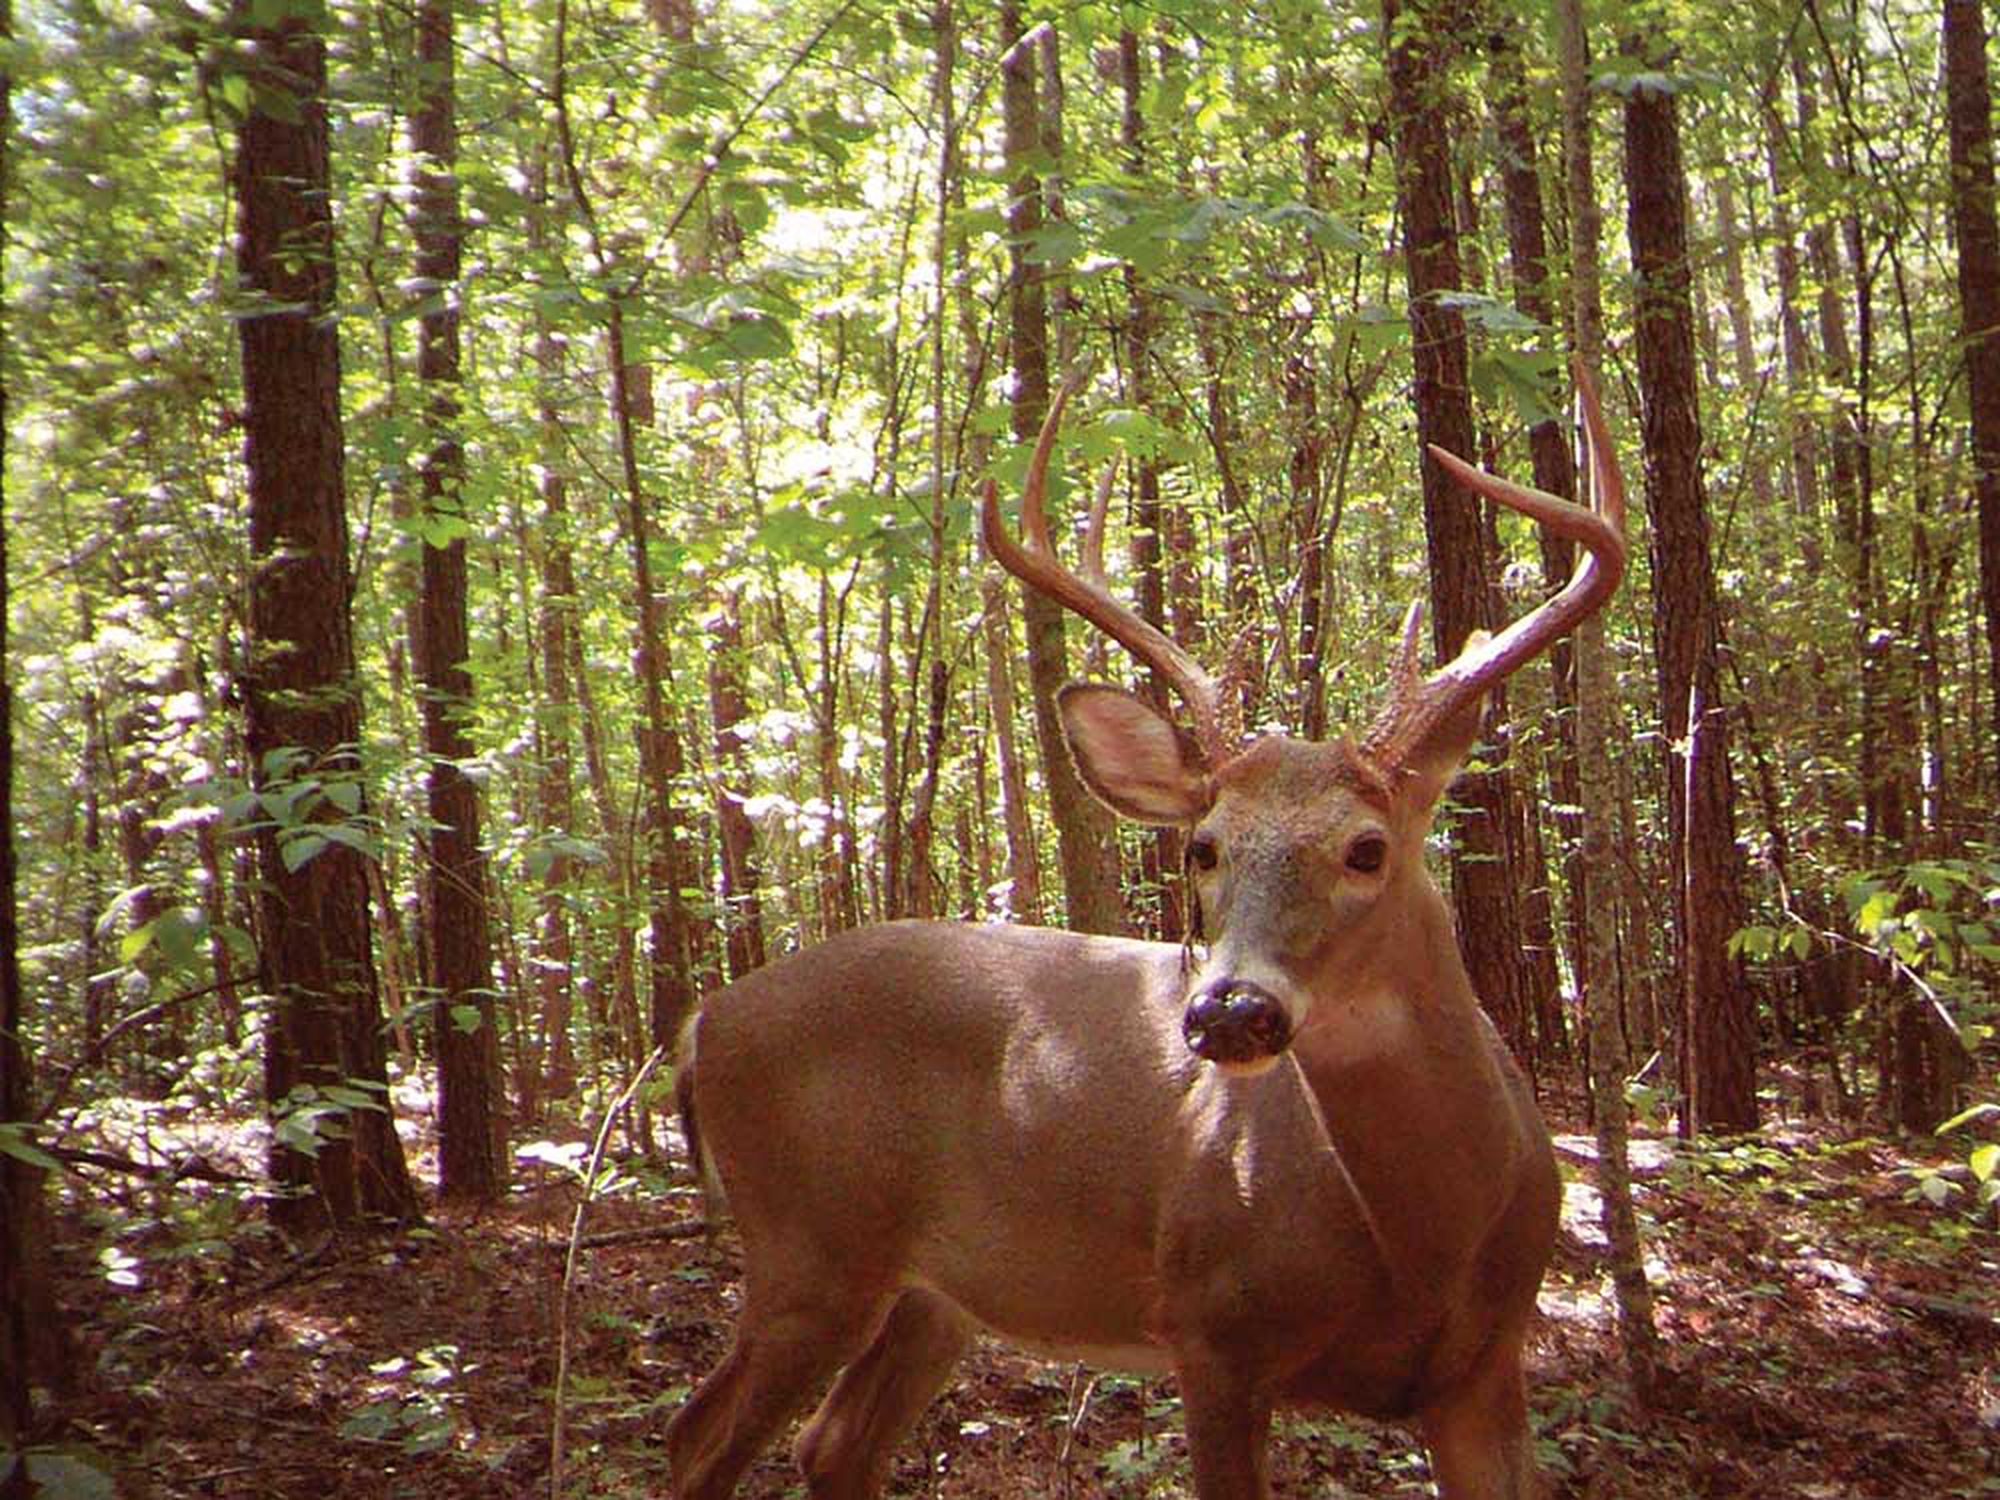 Trail camera images from the authors study showed mature bucks moving during daylight hours.